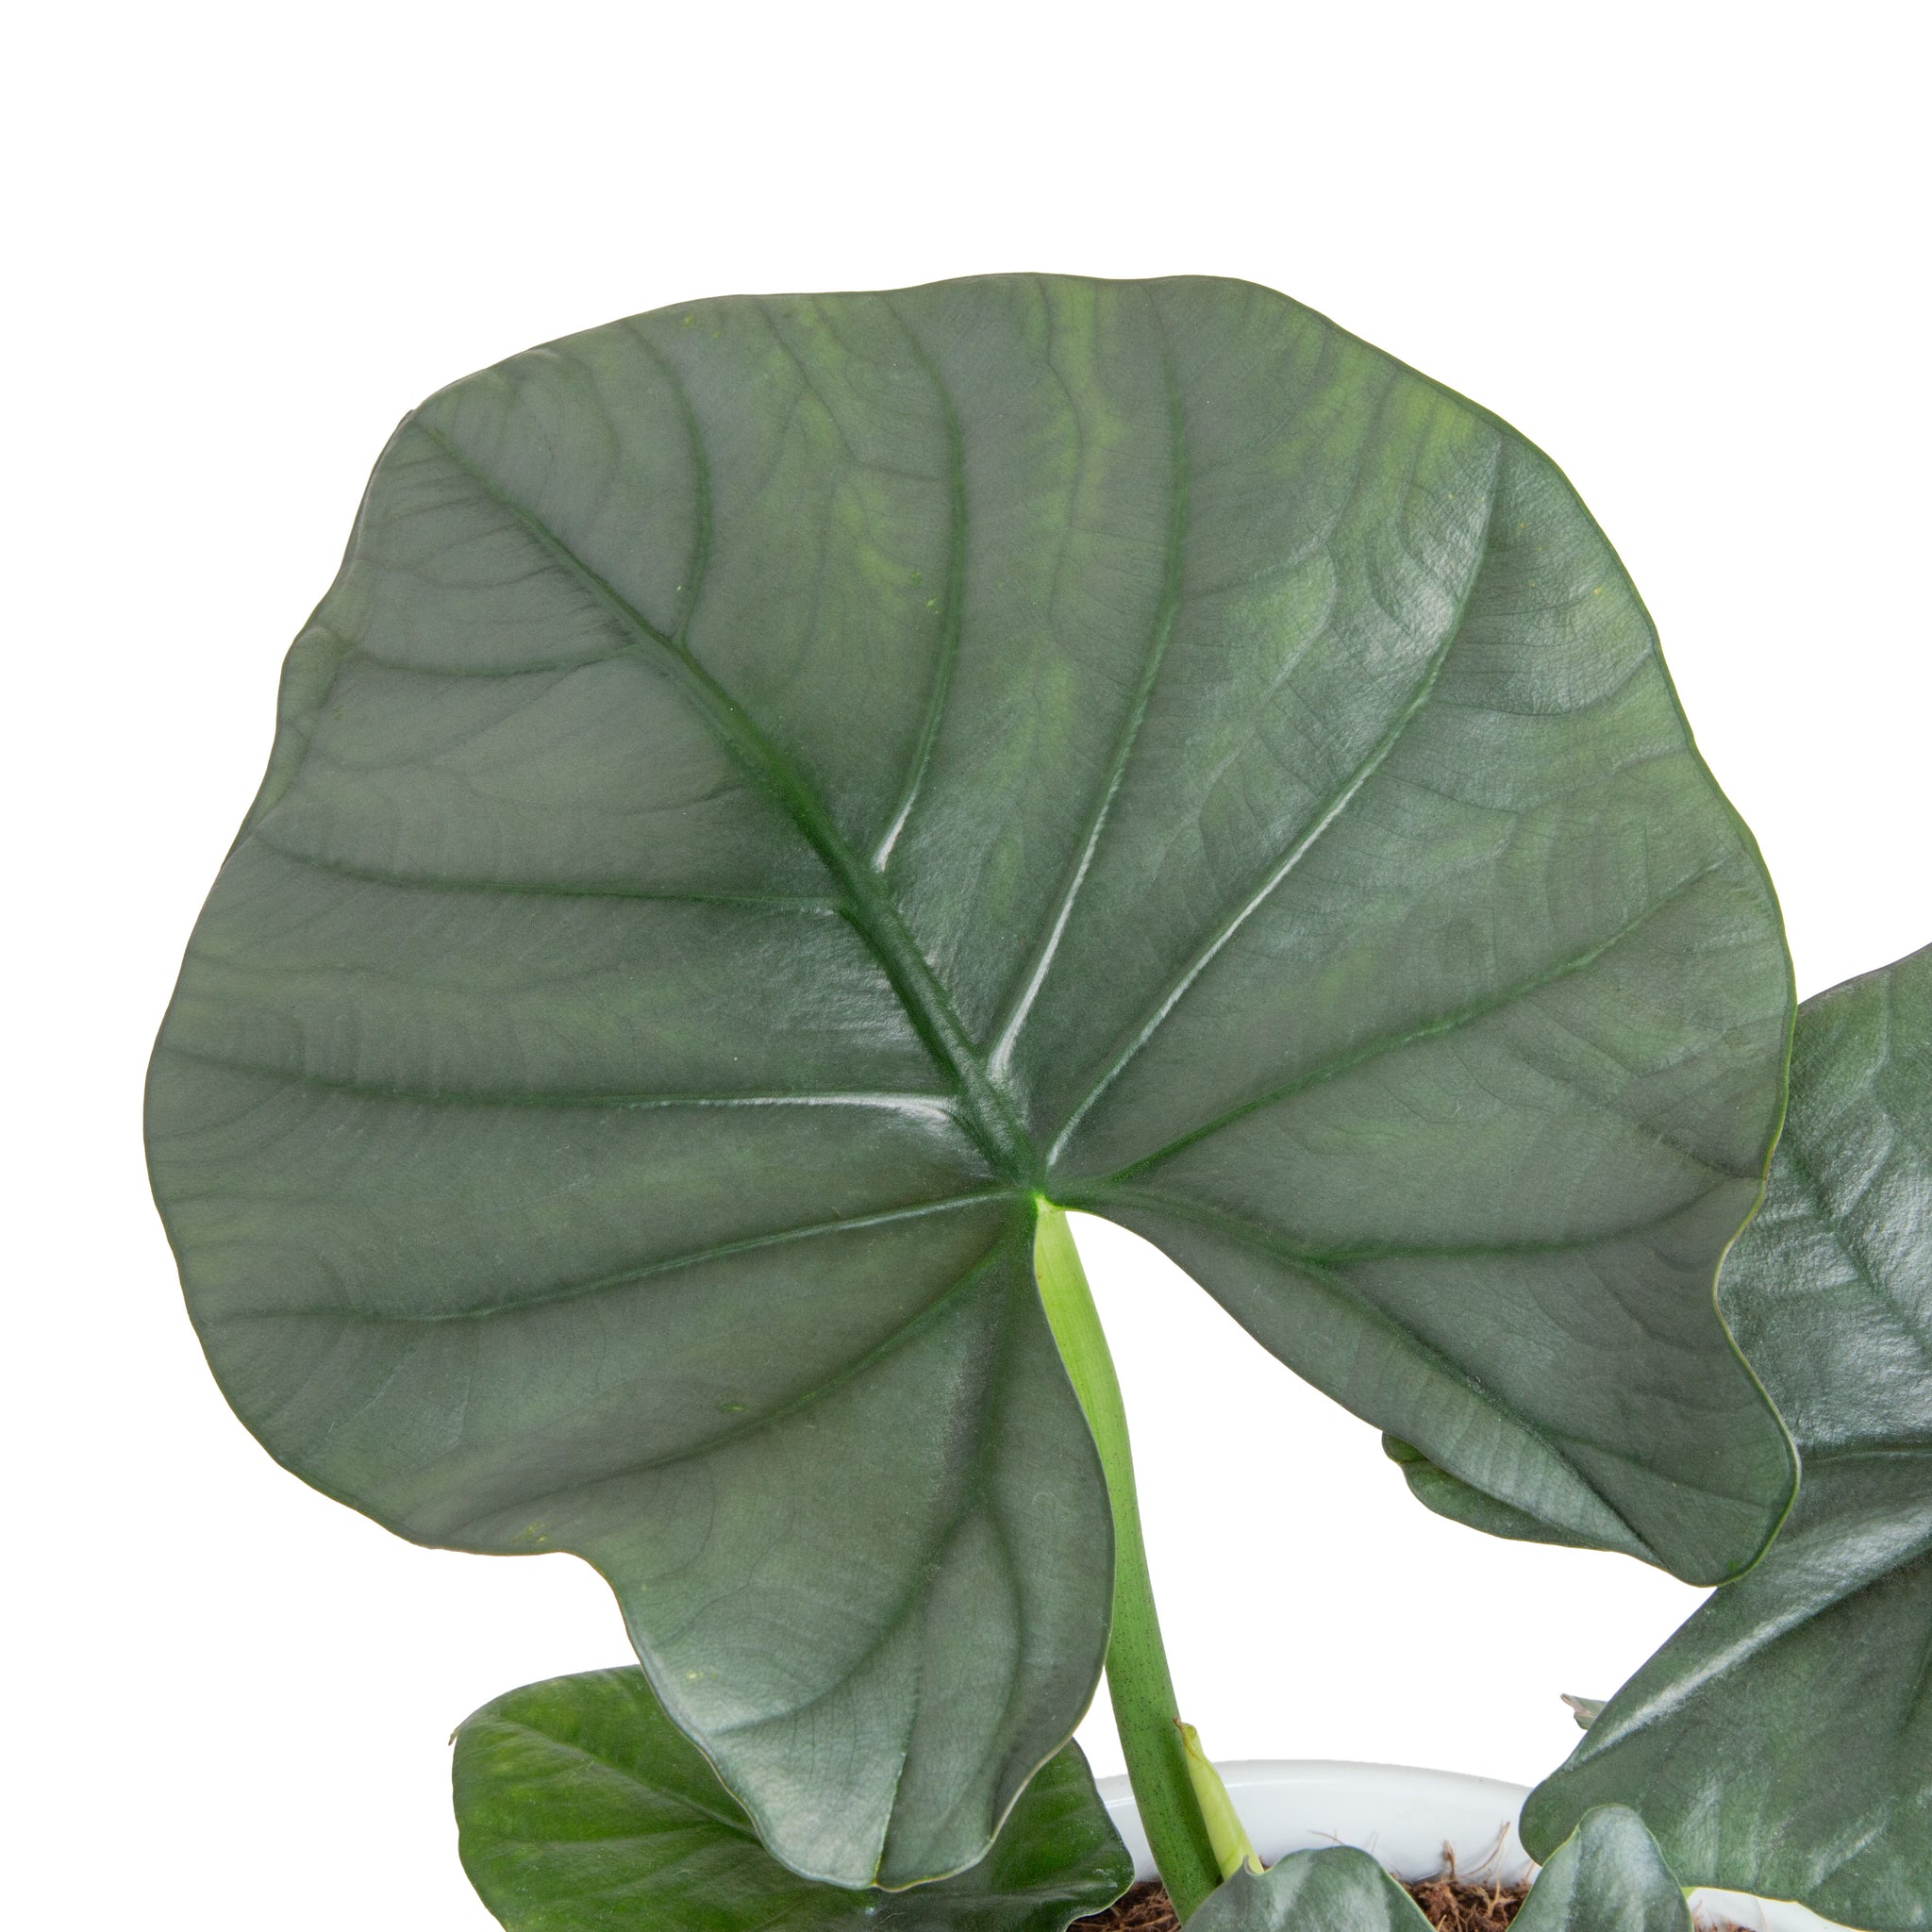 detailed close up of the alocasia reginae foliage to showcase the deep rich green of its leaves and the thick veins